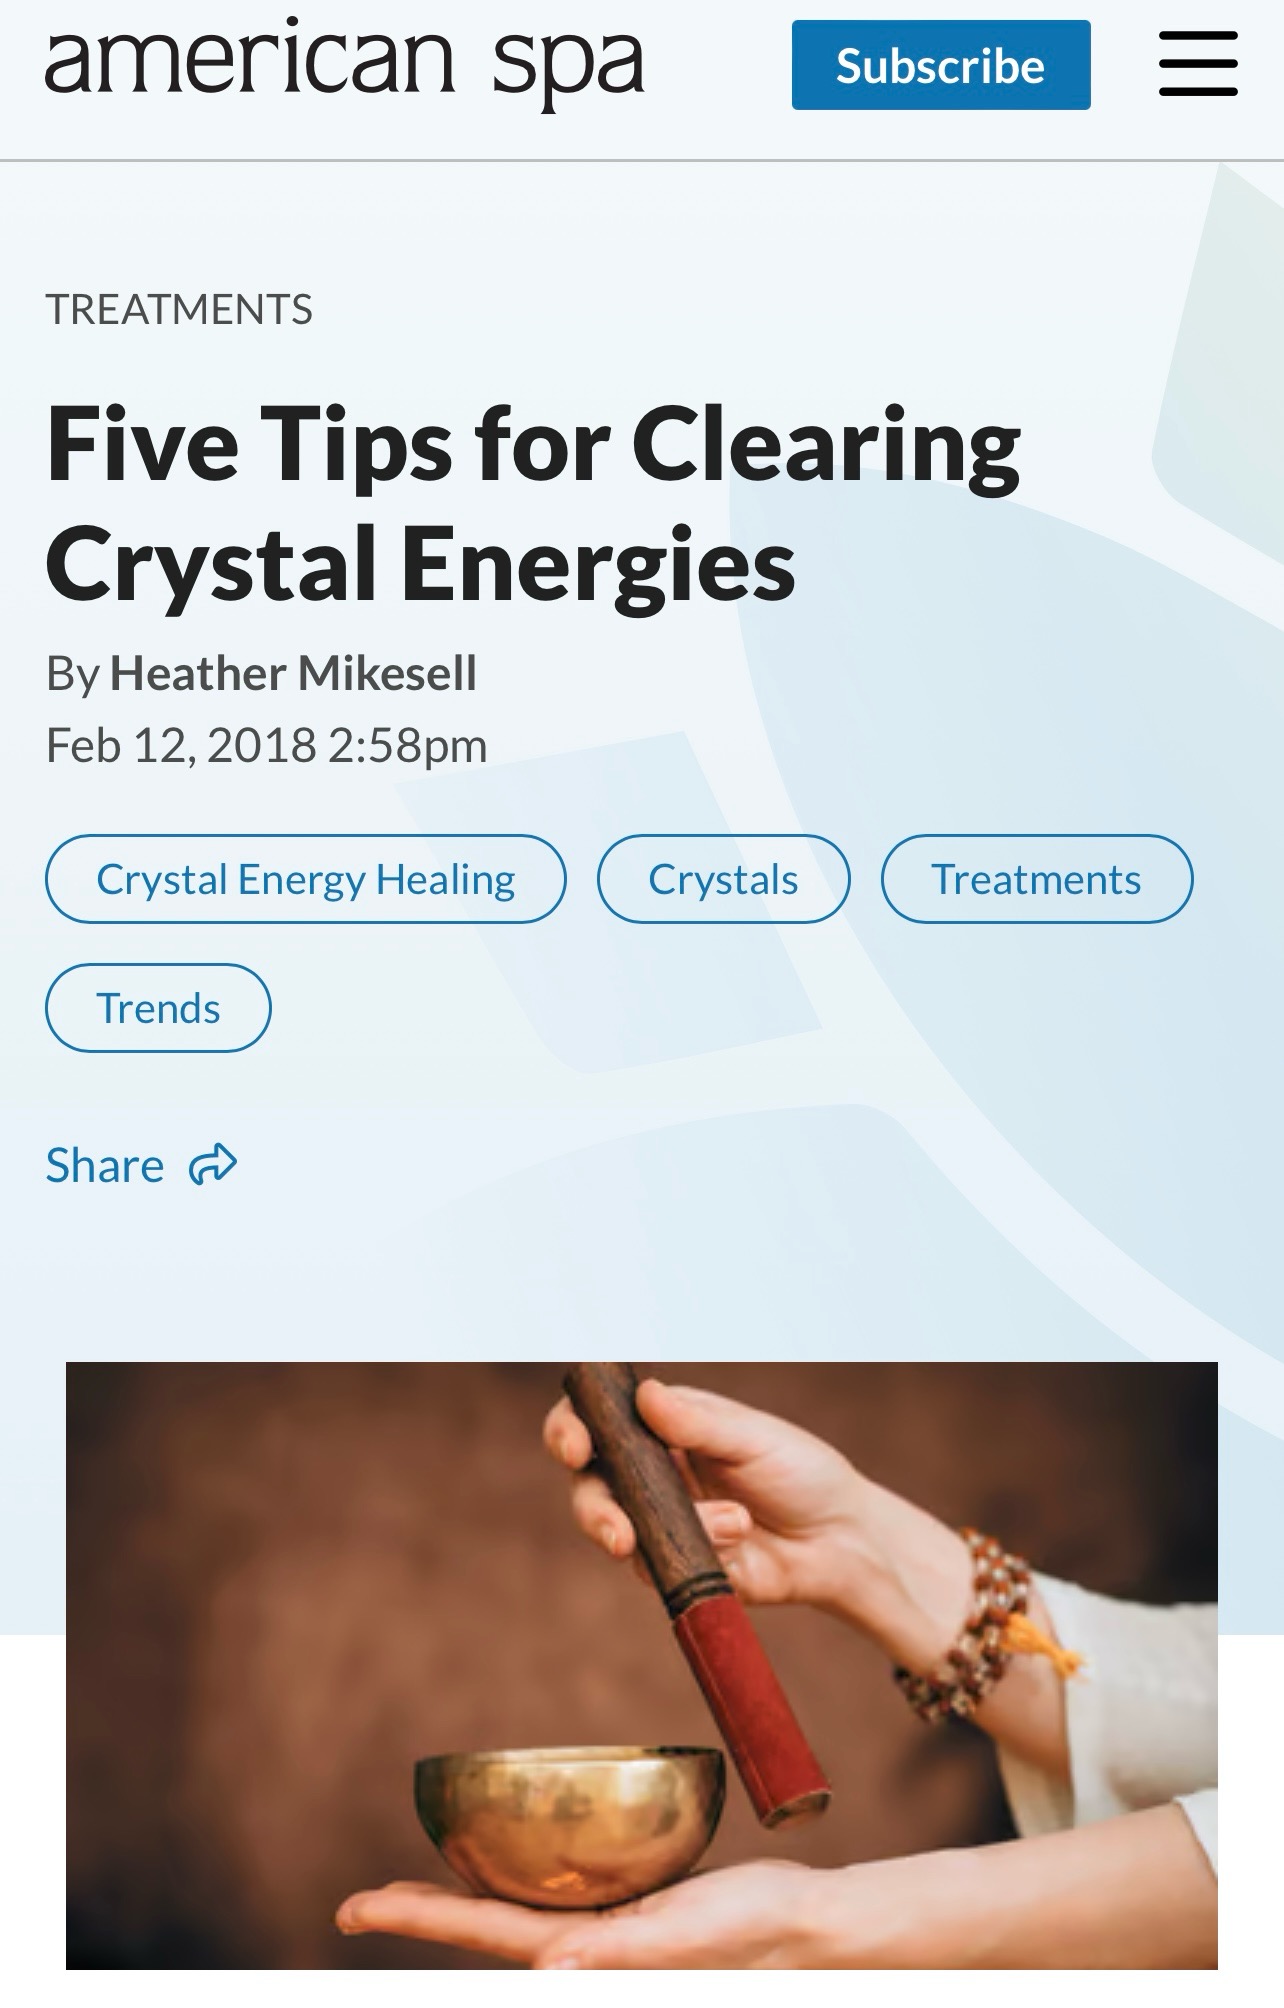 Five Tips for Clearing Crystal Energies in American Spa